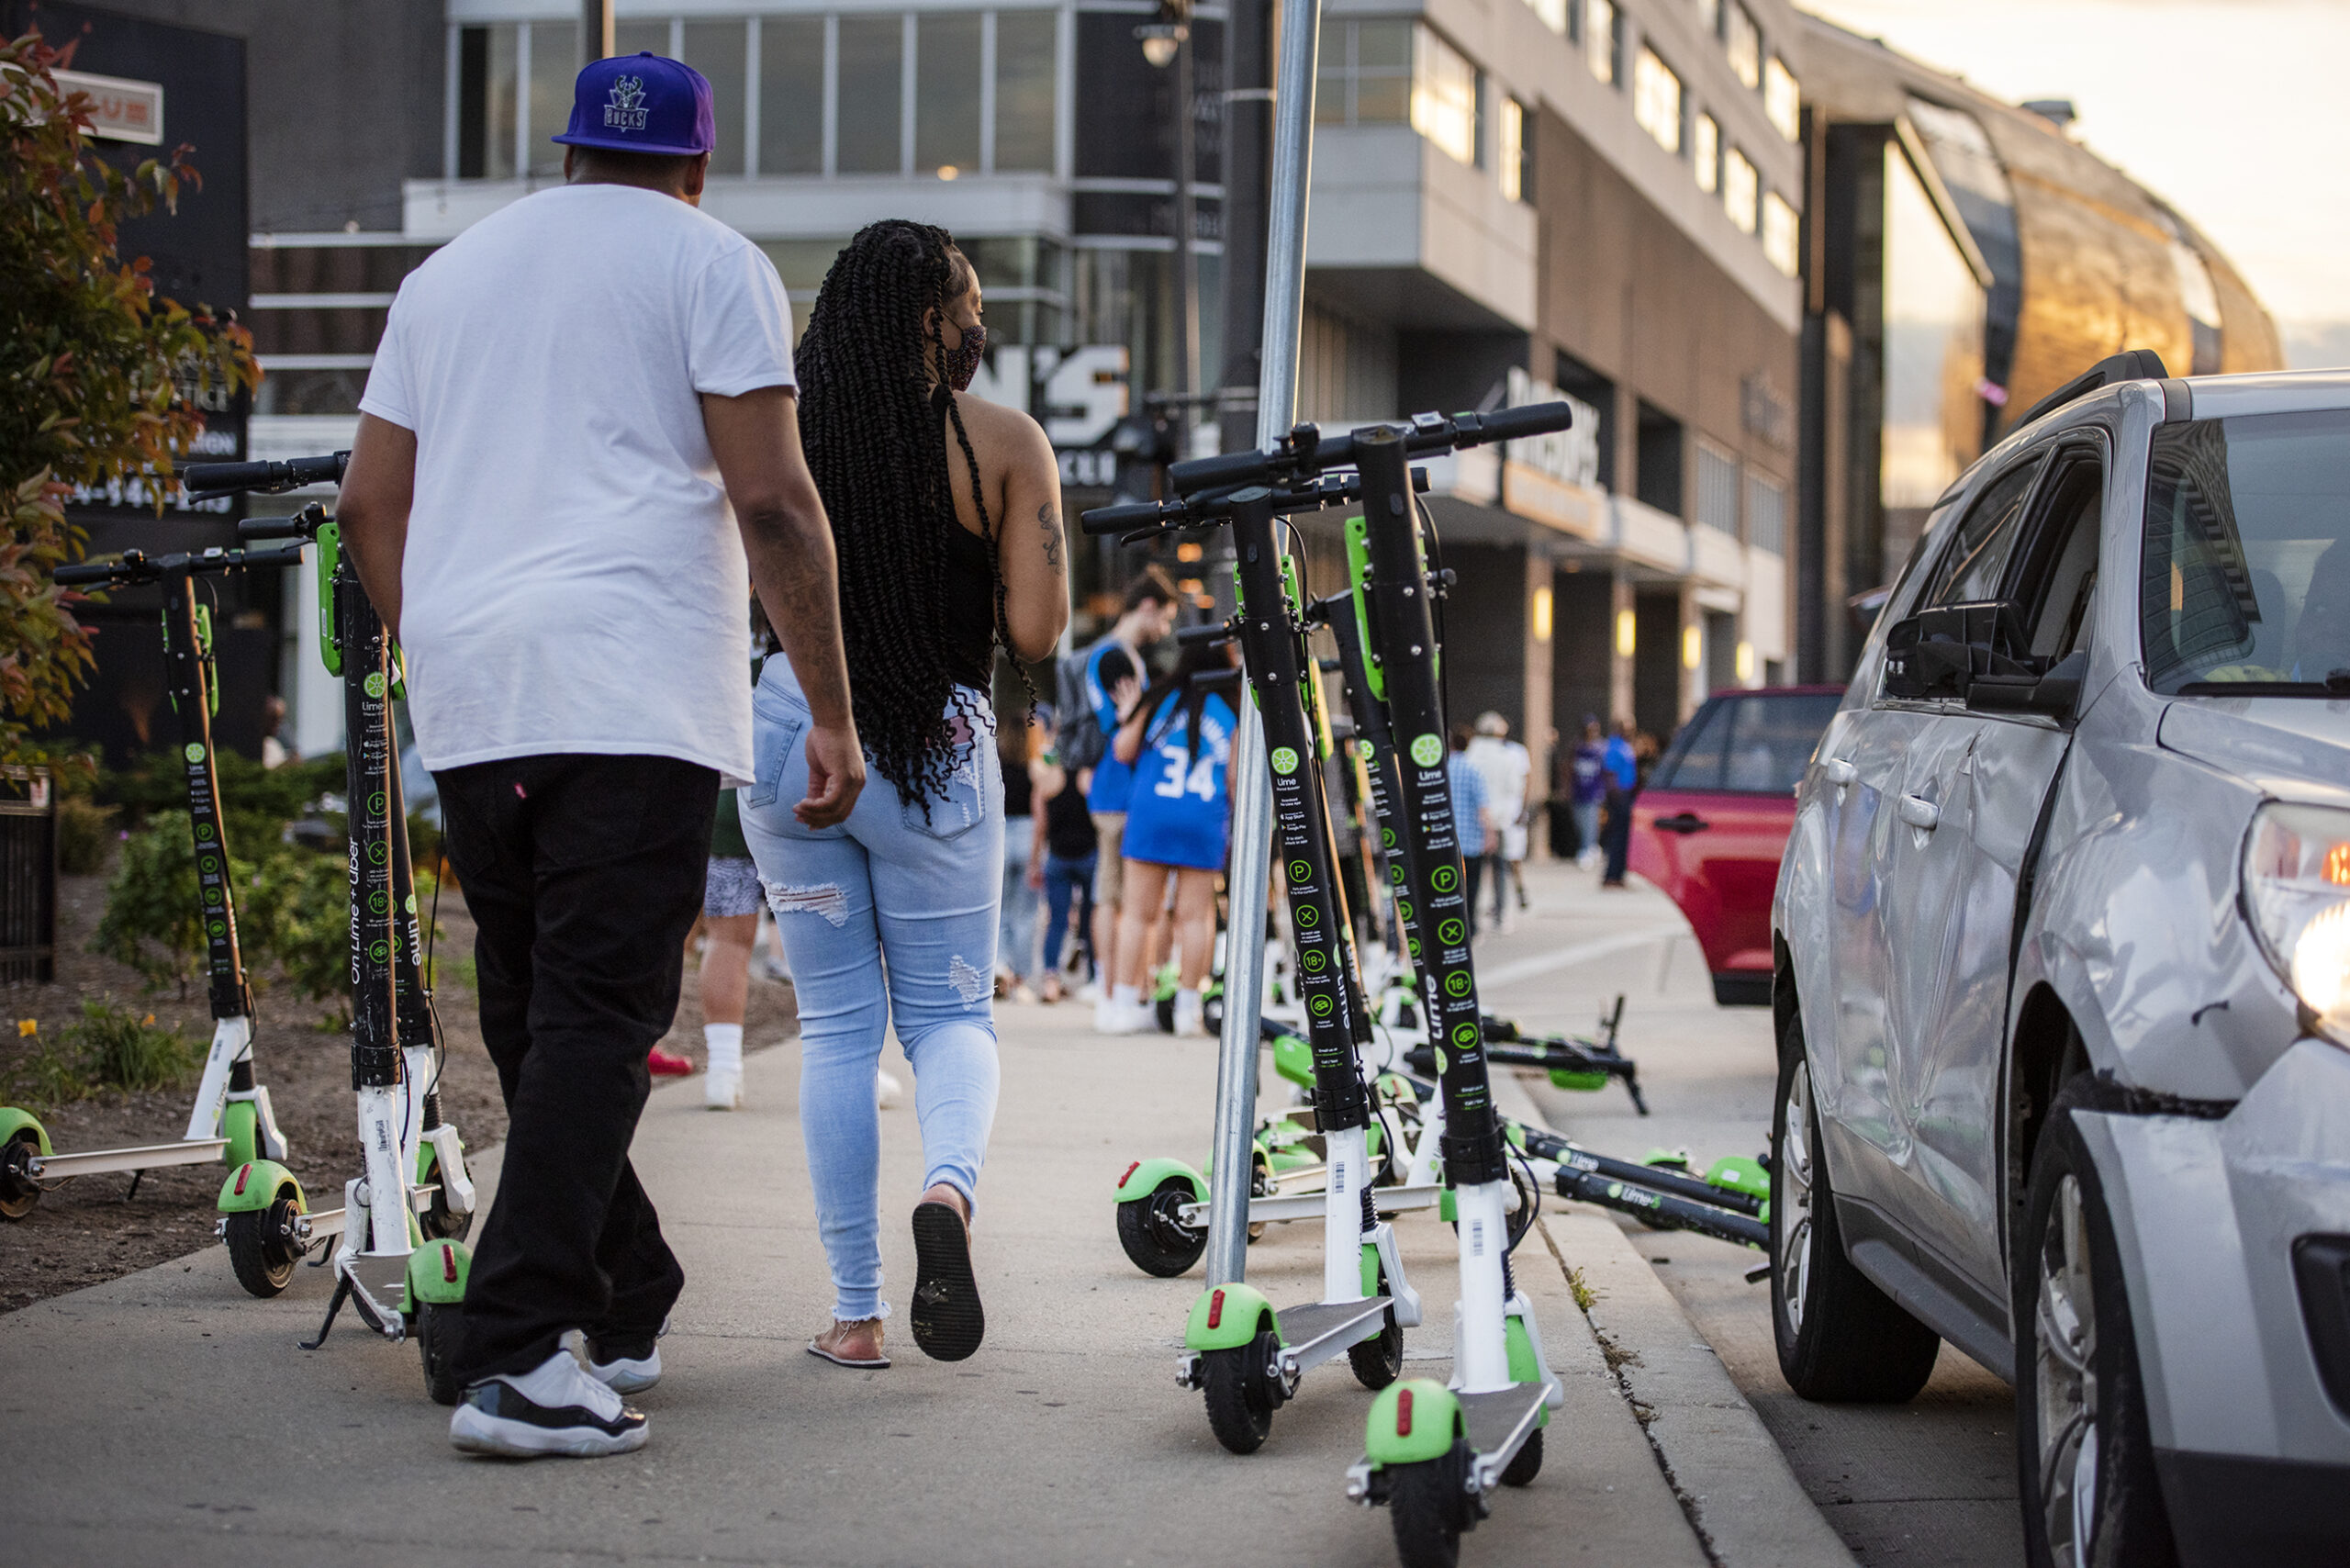 Many scooters are piled onto a sidewalk as pedestrians pass by.